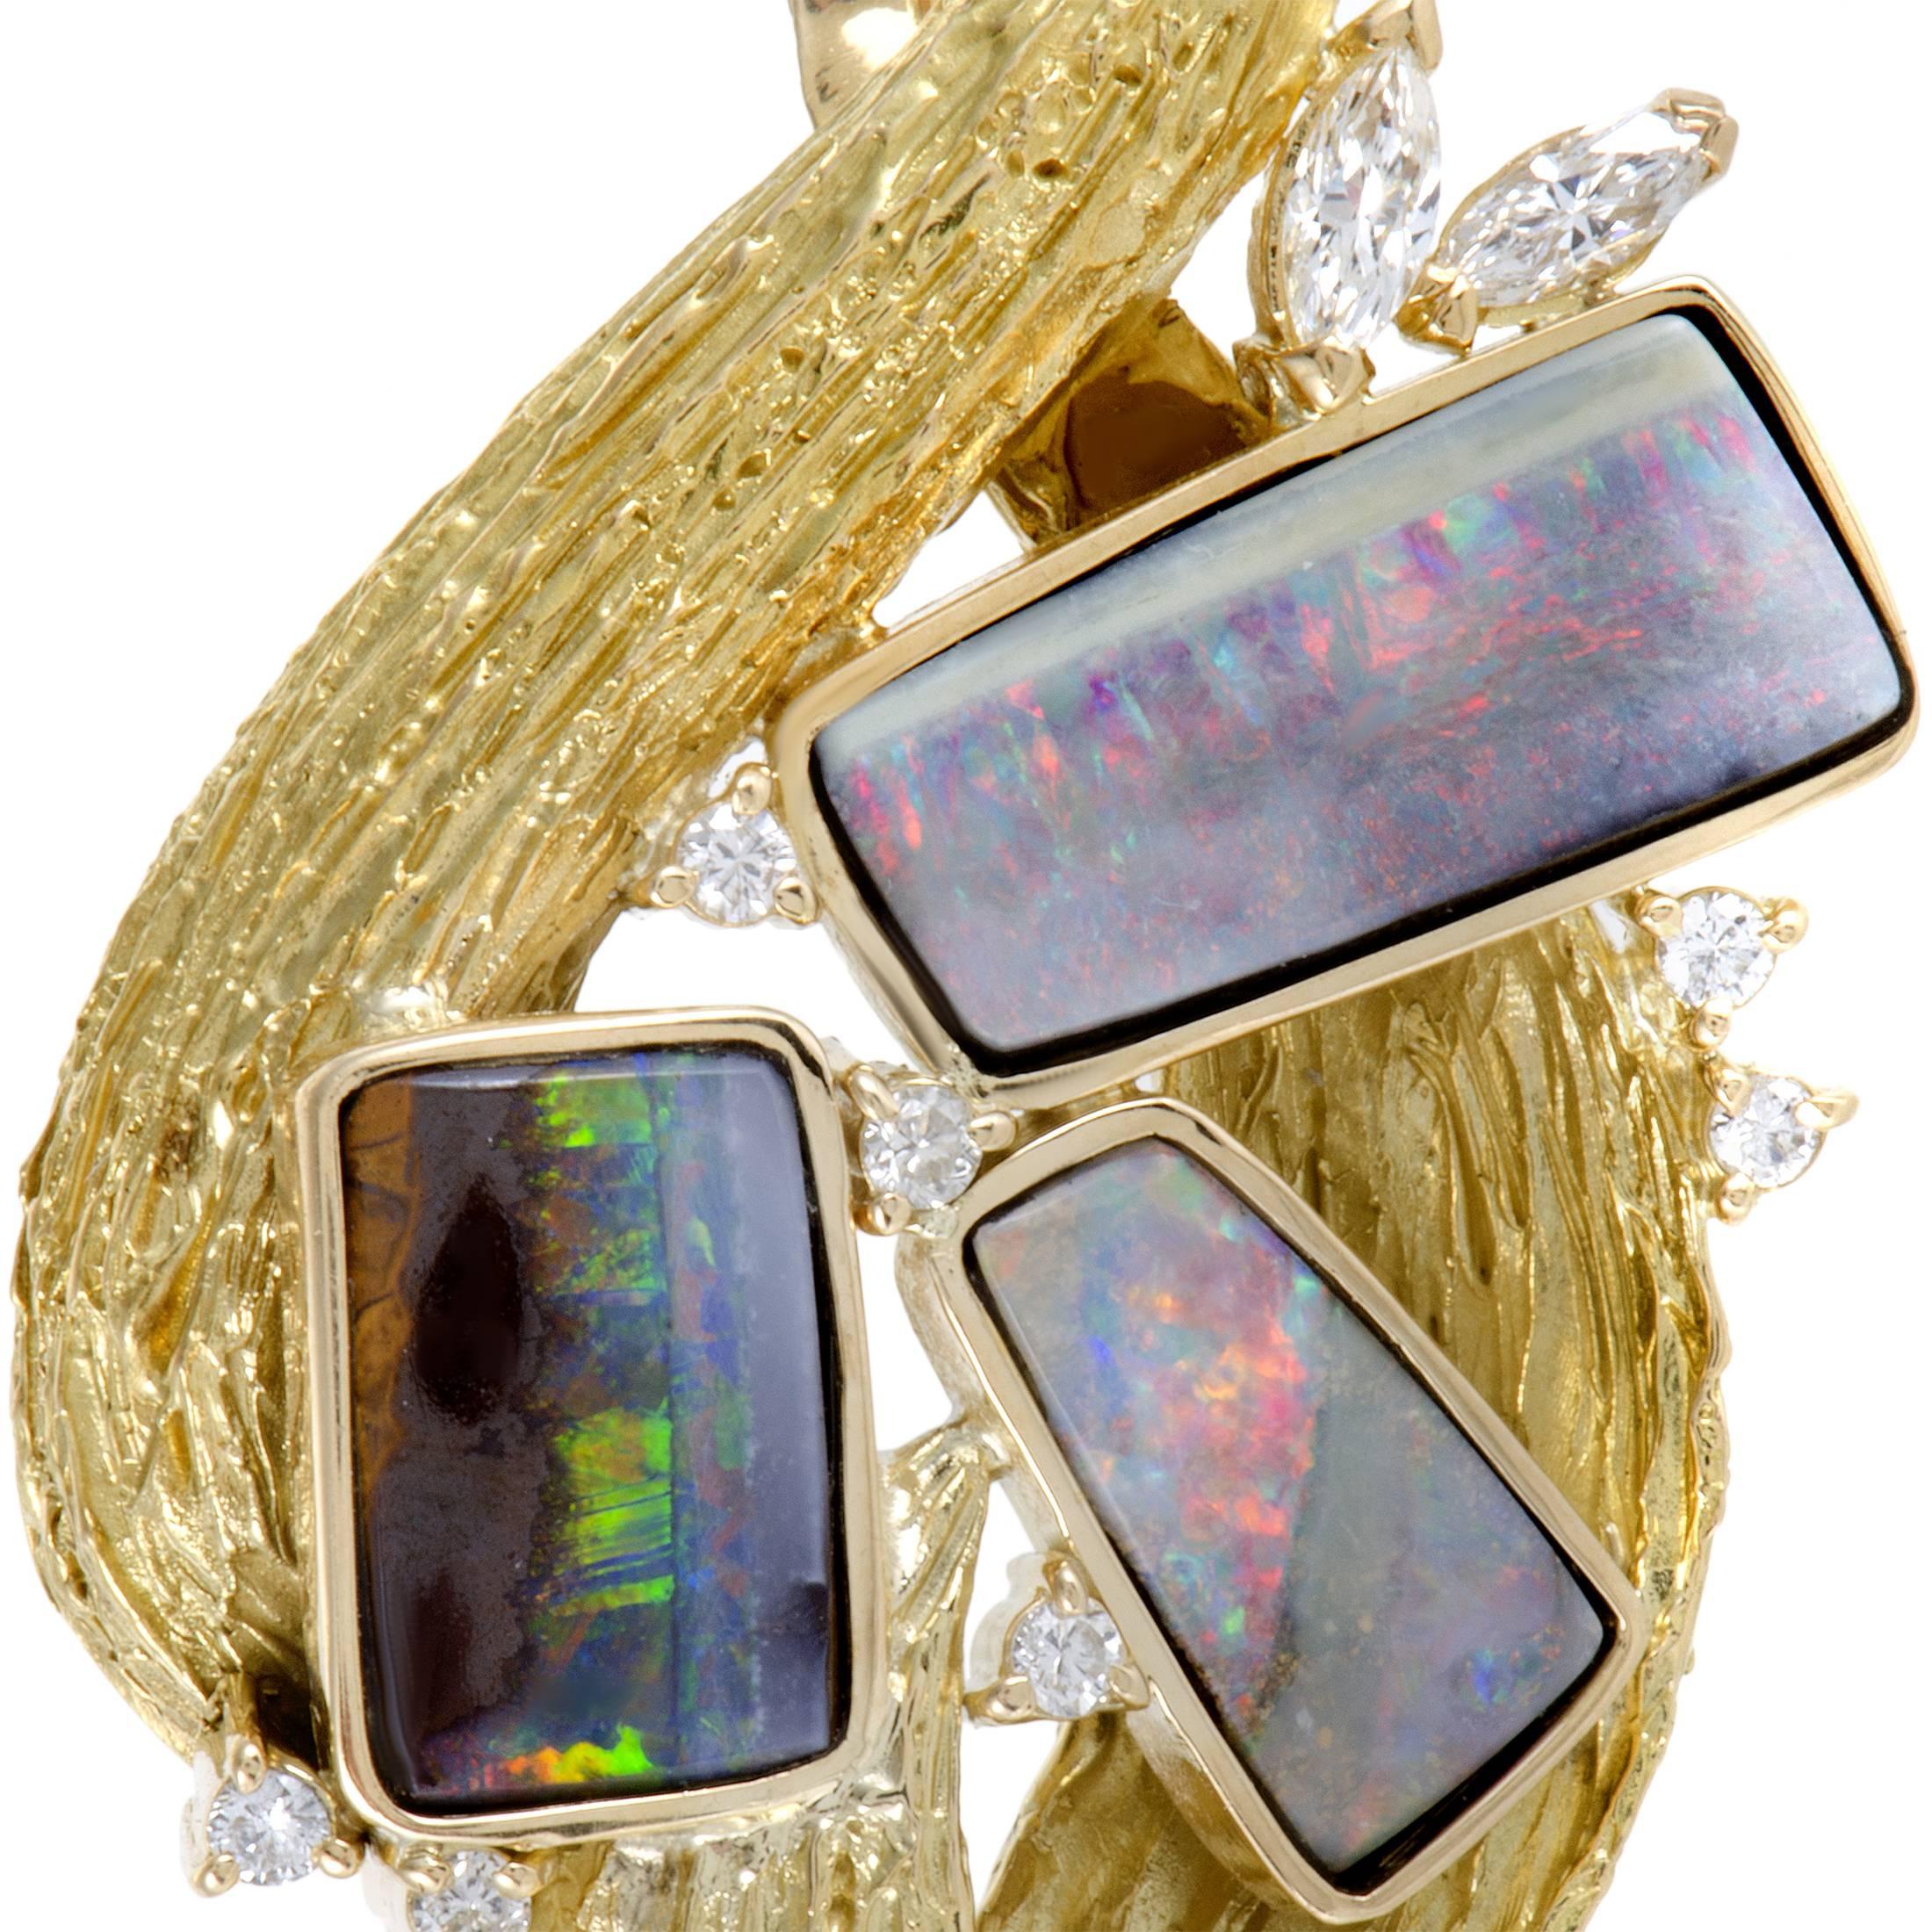 This extraordinary jewelry piece is made of 18K yellow gold and boasts an incredibly fashionable appeal. The ingeniously decorated surface of the gold presents an alluring backdrop for the splendid opals and 0.31 carats of diamonds.
